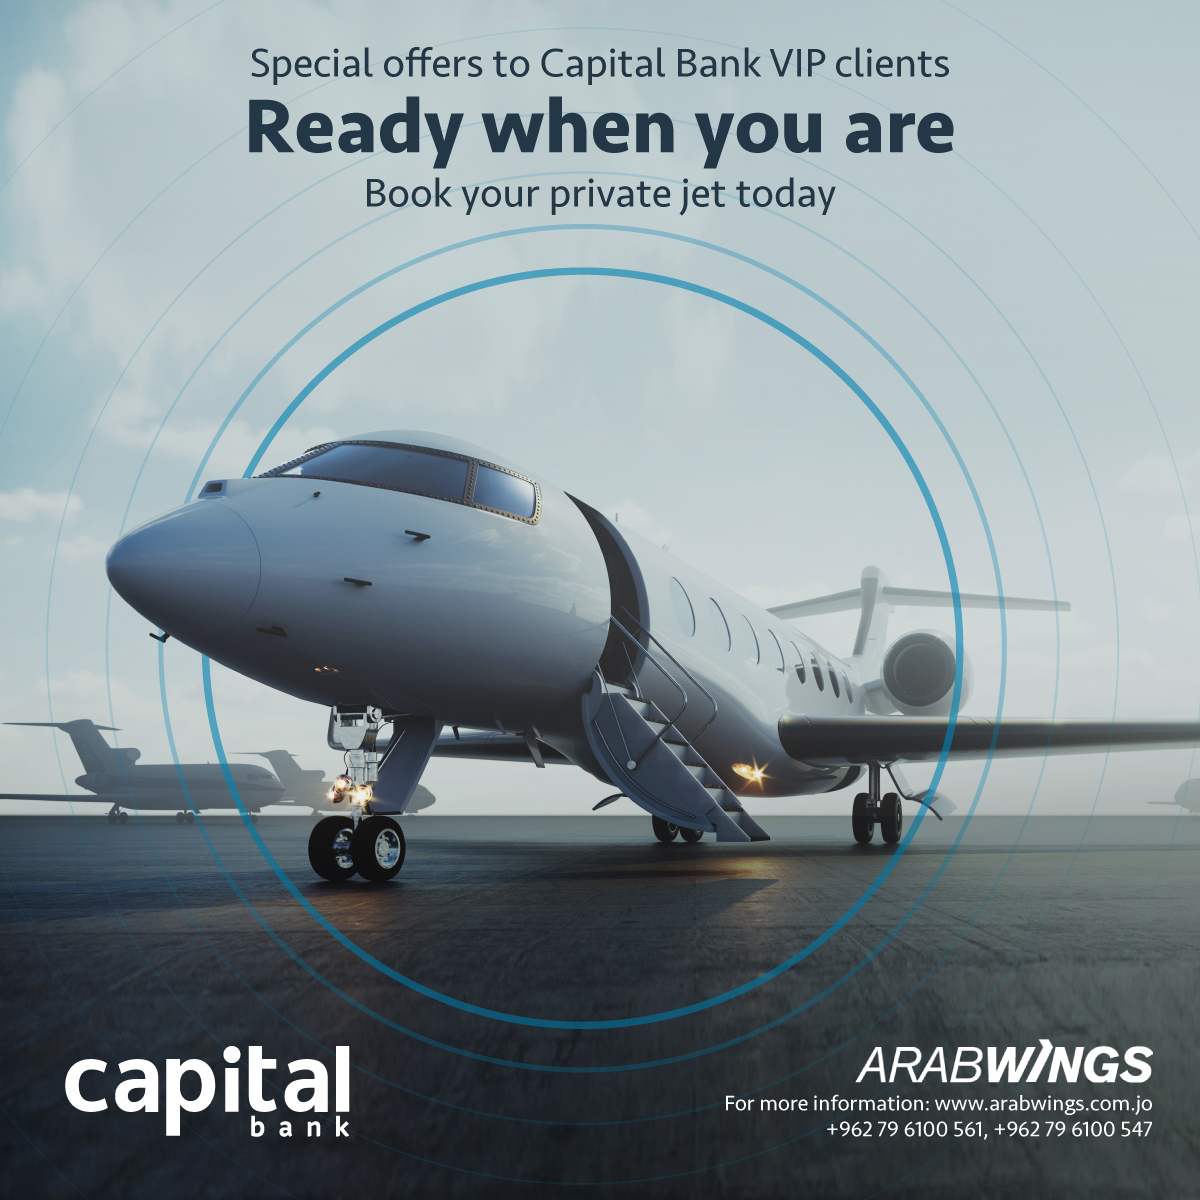 Giving VIP treatment for our VIP clients! Book your luxurious travel today and fly on a private jet with Capital Bank and Arab Wings. For more information visit: bit.ly/3IUY7QN